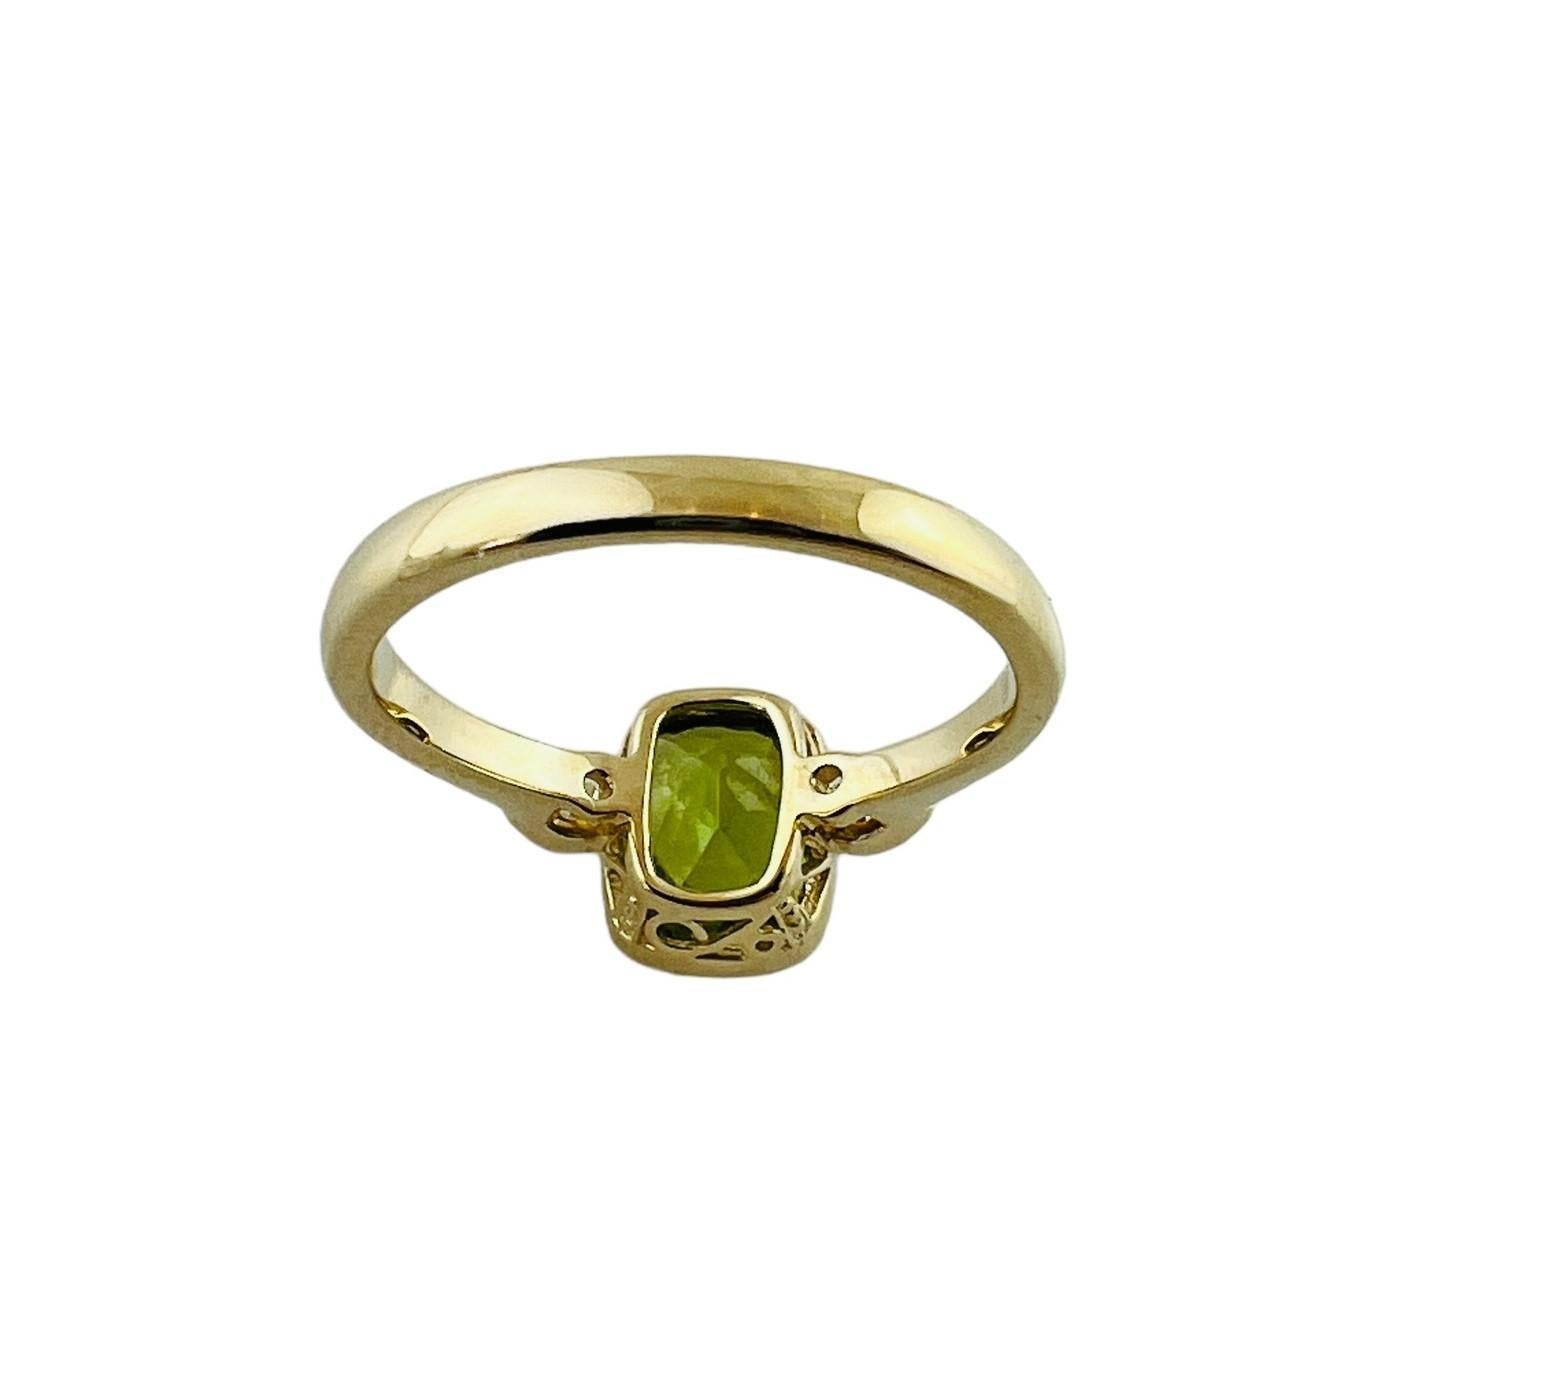 14K Yellow Gold Peridot and Diamond Ring 

This ring has a center bezel set faceted green peridot stone which is surrounded you a single diamond on each side

Ring size 6.5

Shank approx. 2.3mm

Front of ring is approximately 9.4mm x 8.4mm

Diamonds